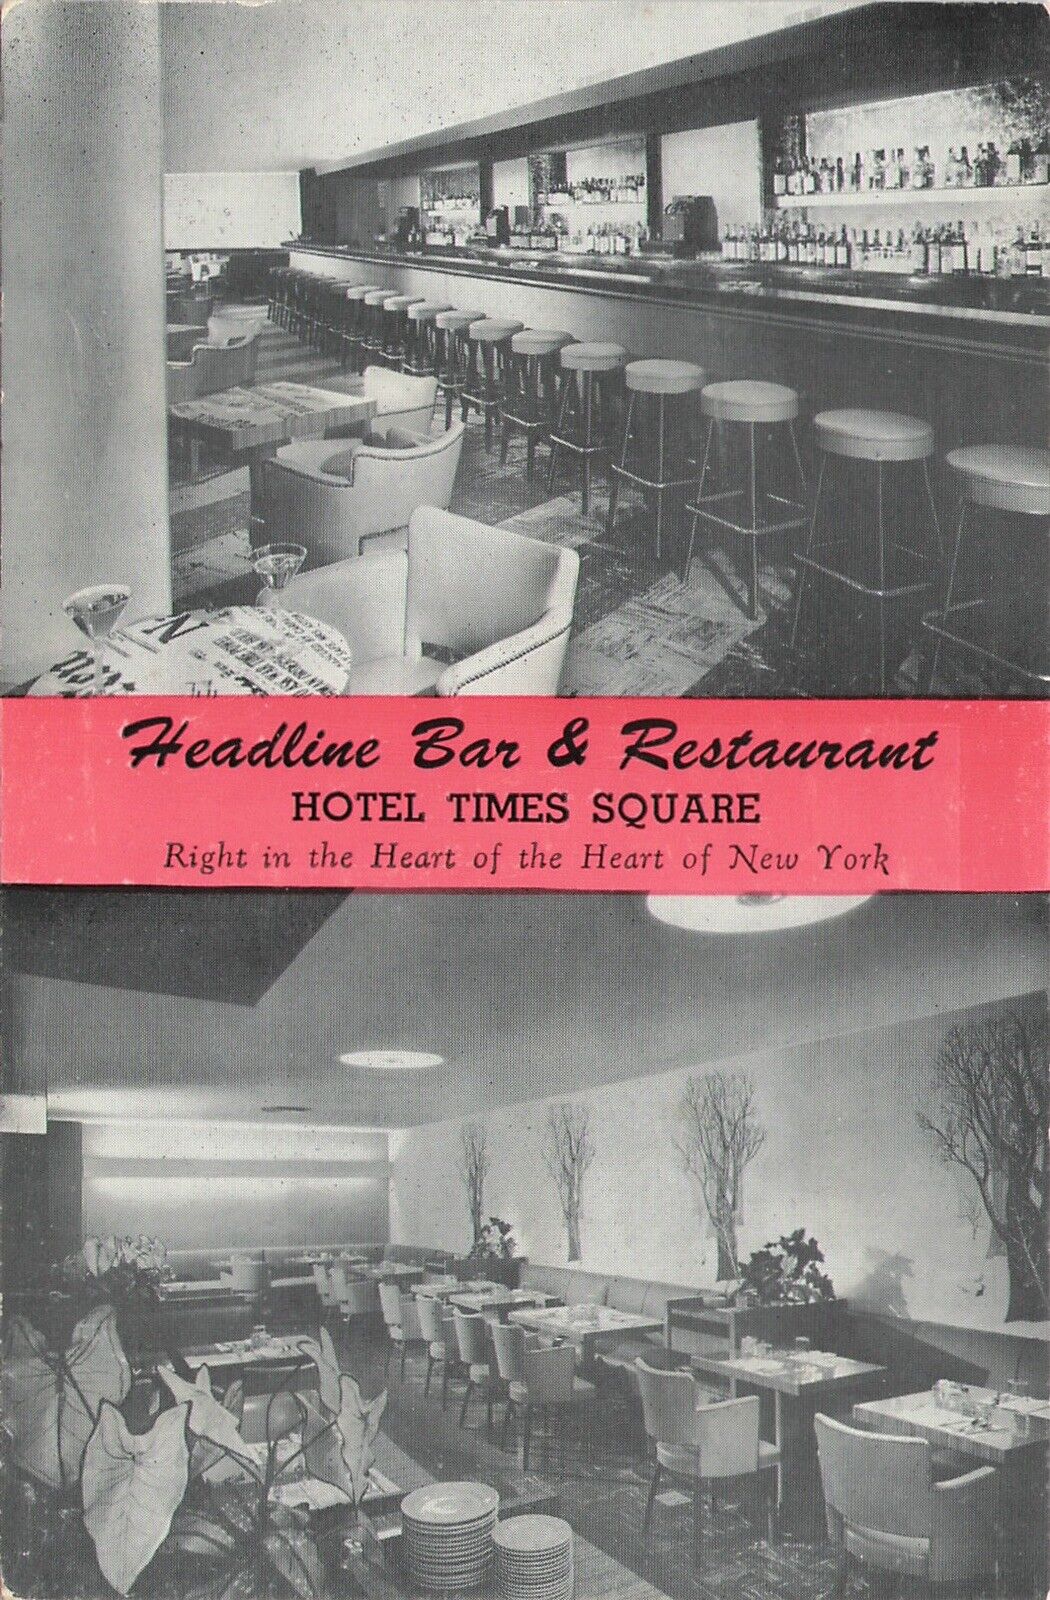 Headline Bar & Restaurant At The Hotel Times Square NYC 1950s Postcard